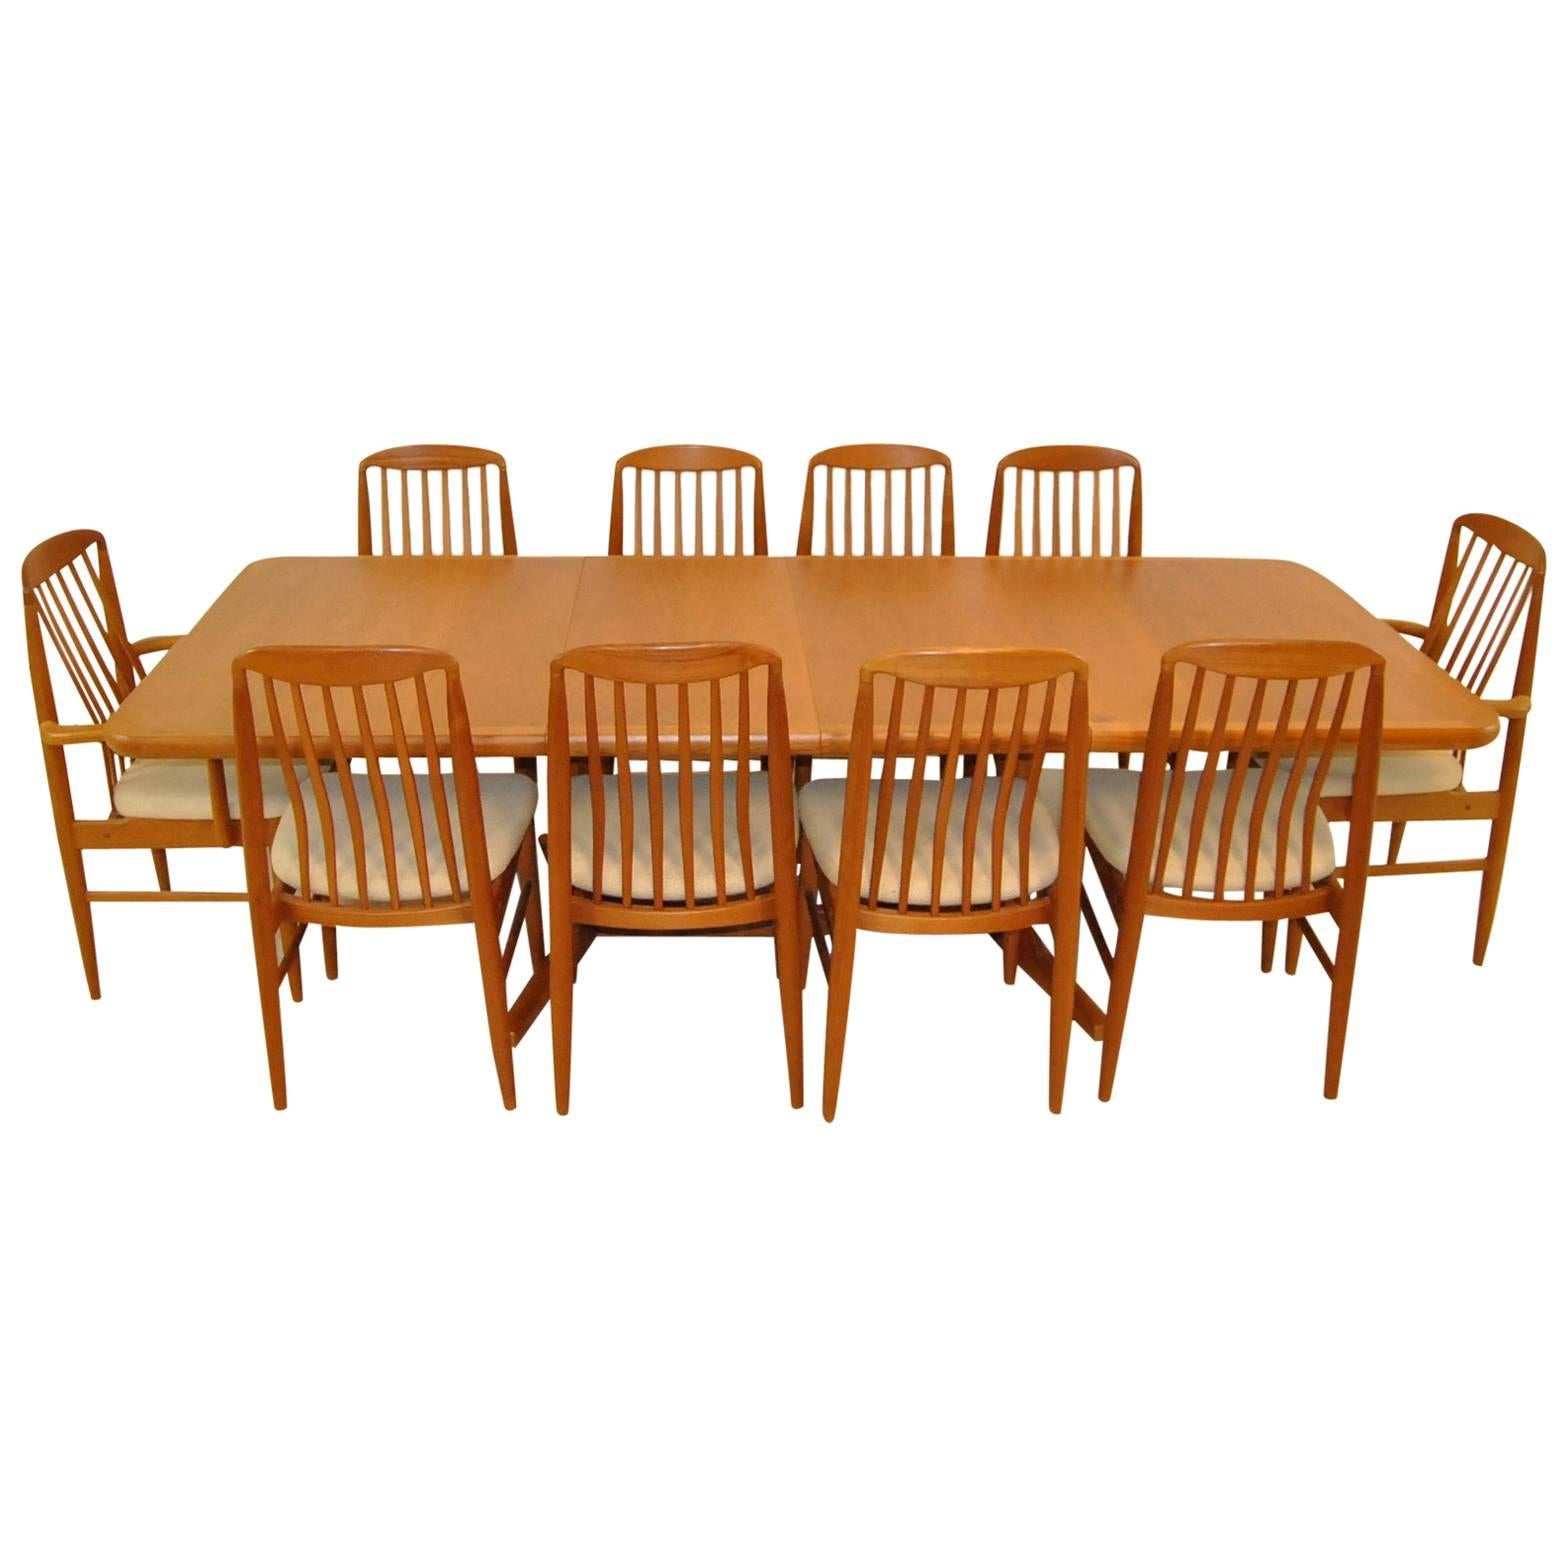 Late 20th Century Teak Dining Table with Ten Benny Linden Chairs